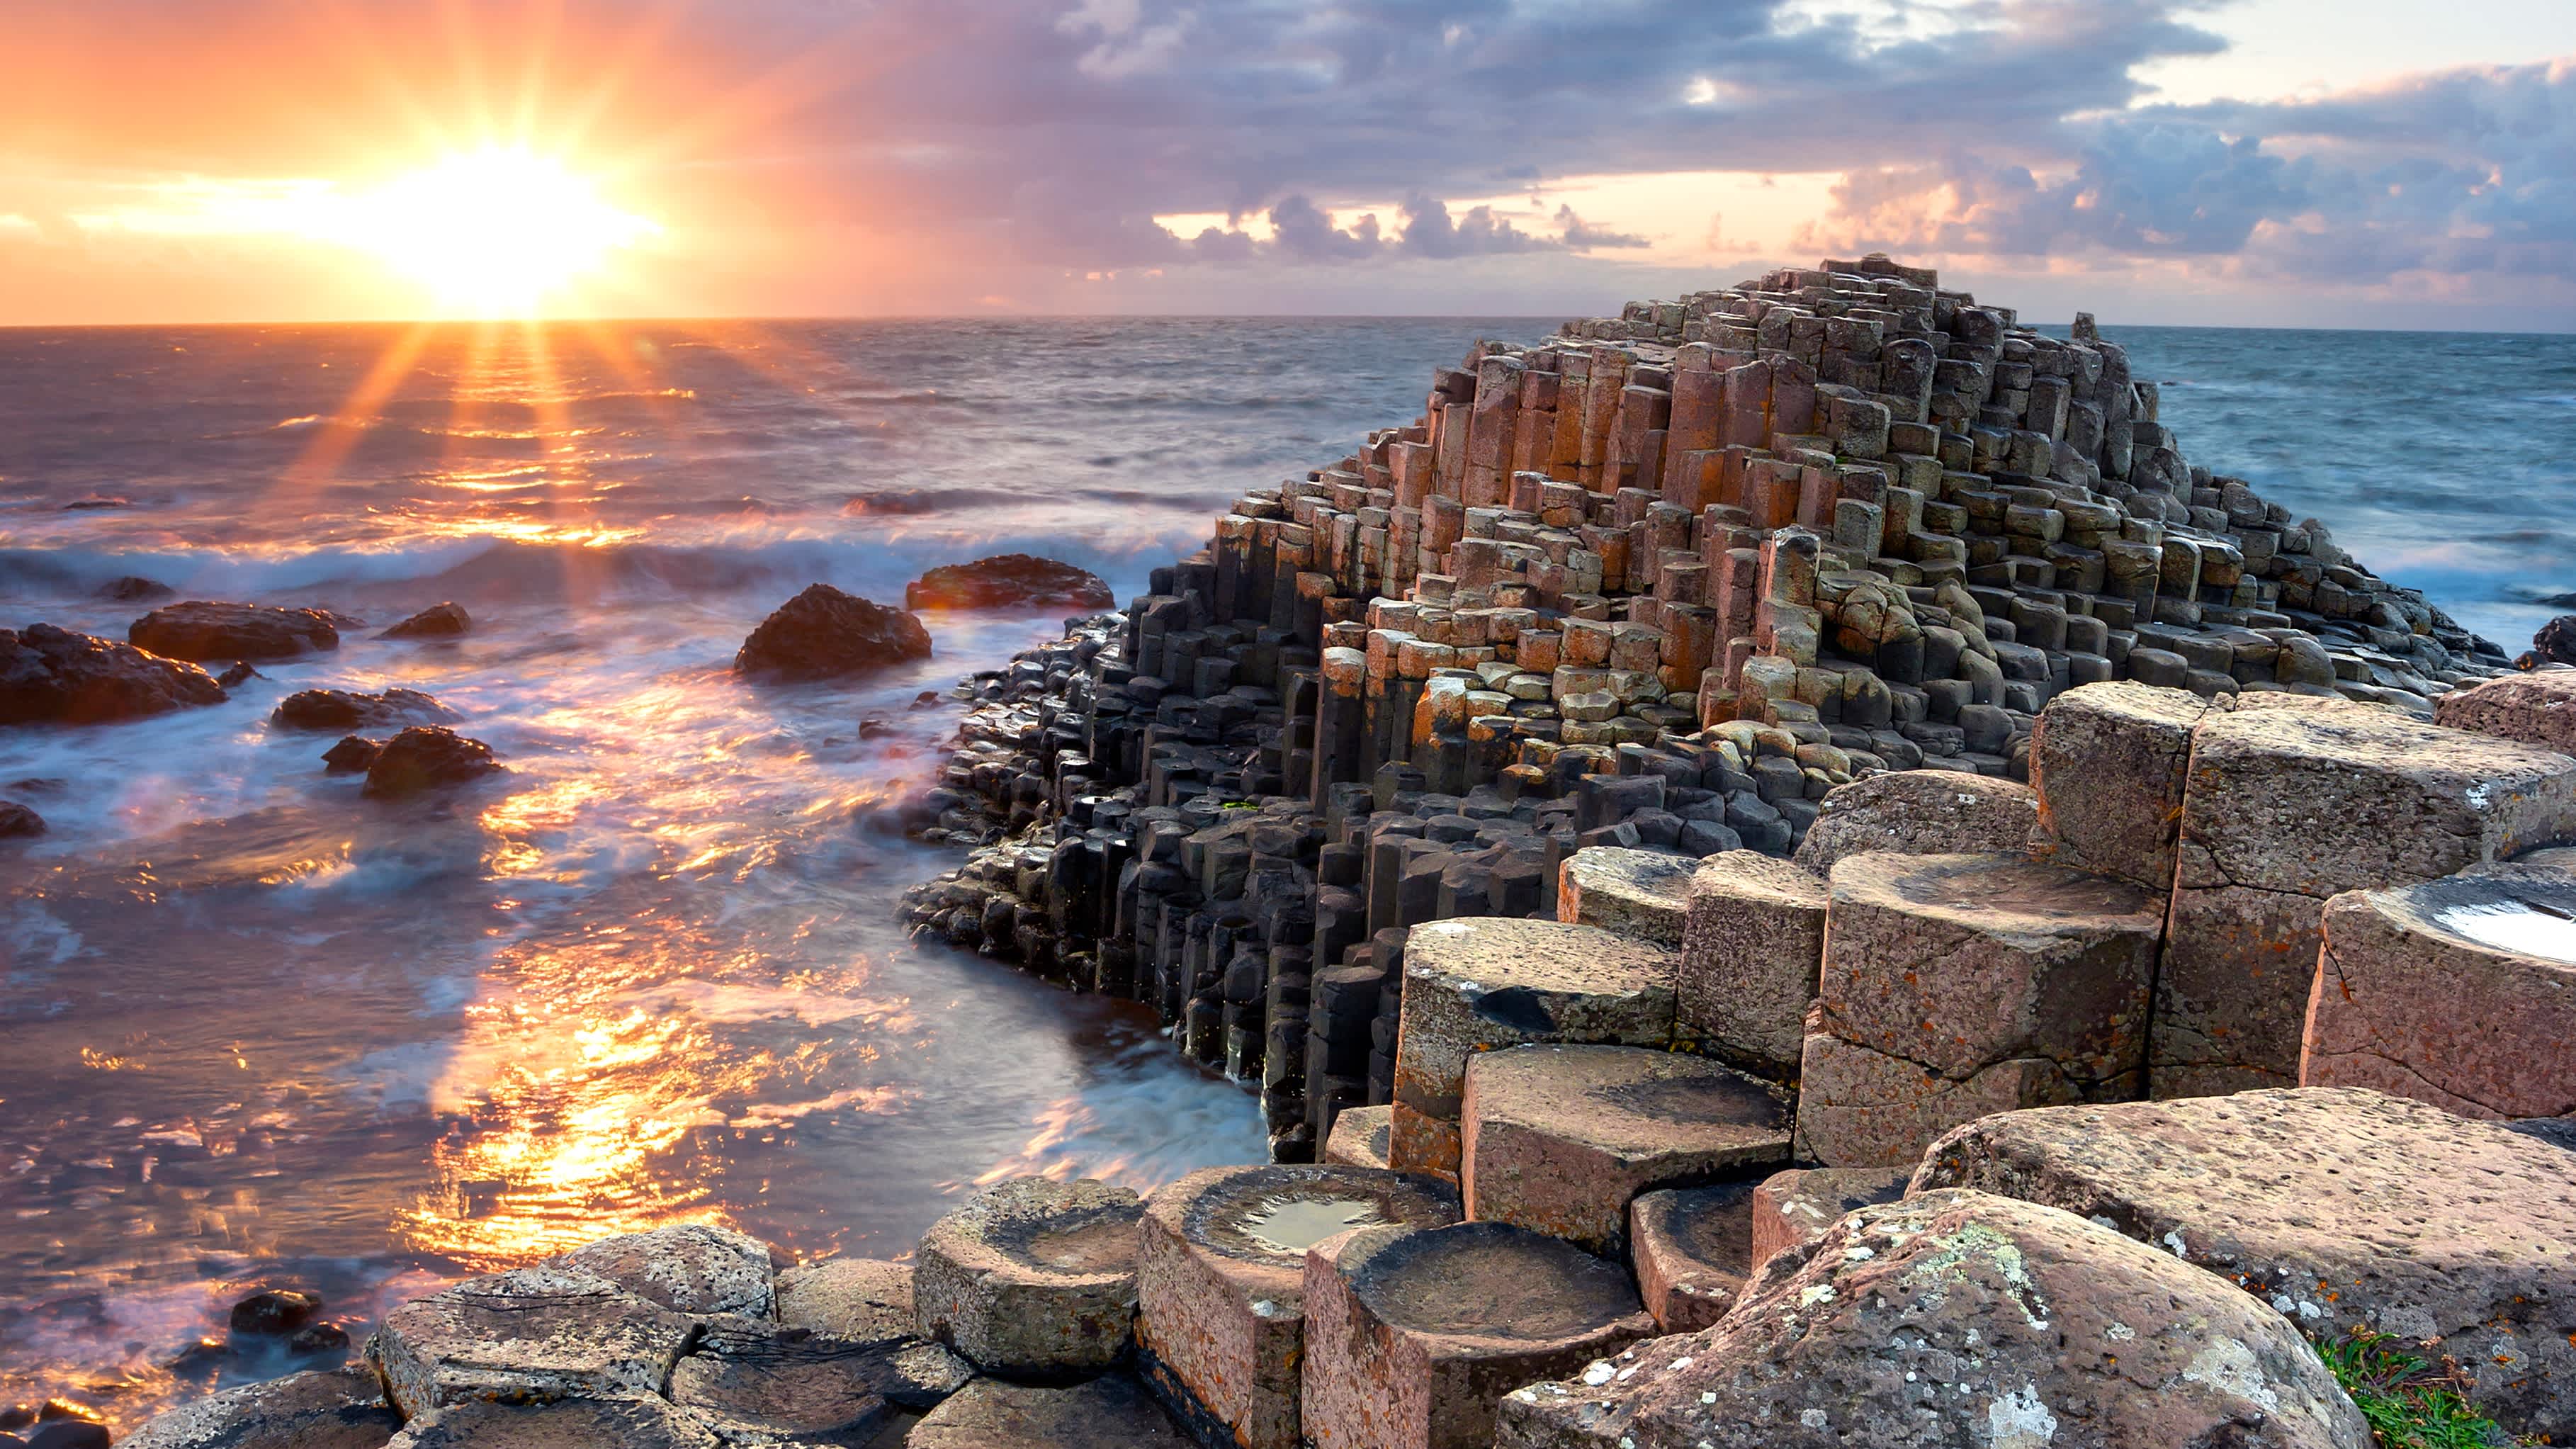 Discover the Giant's Causeway on a Game of Thrones Ireland tour. The sky is purple and the water breaks on the basalt columns. 